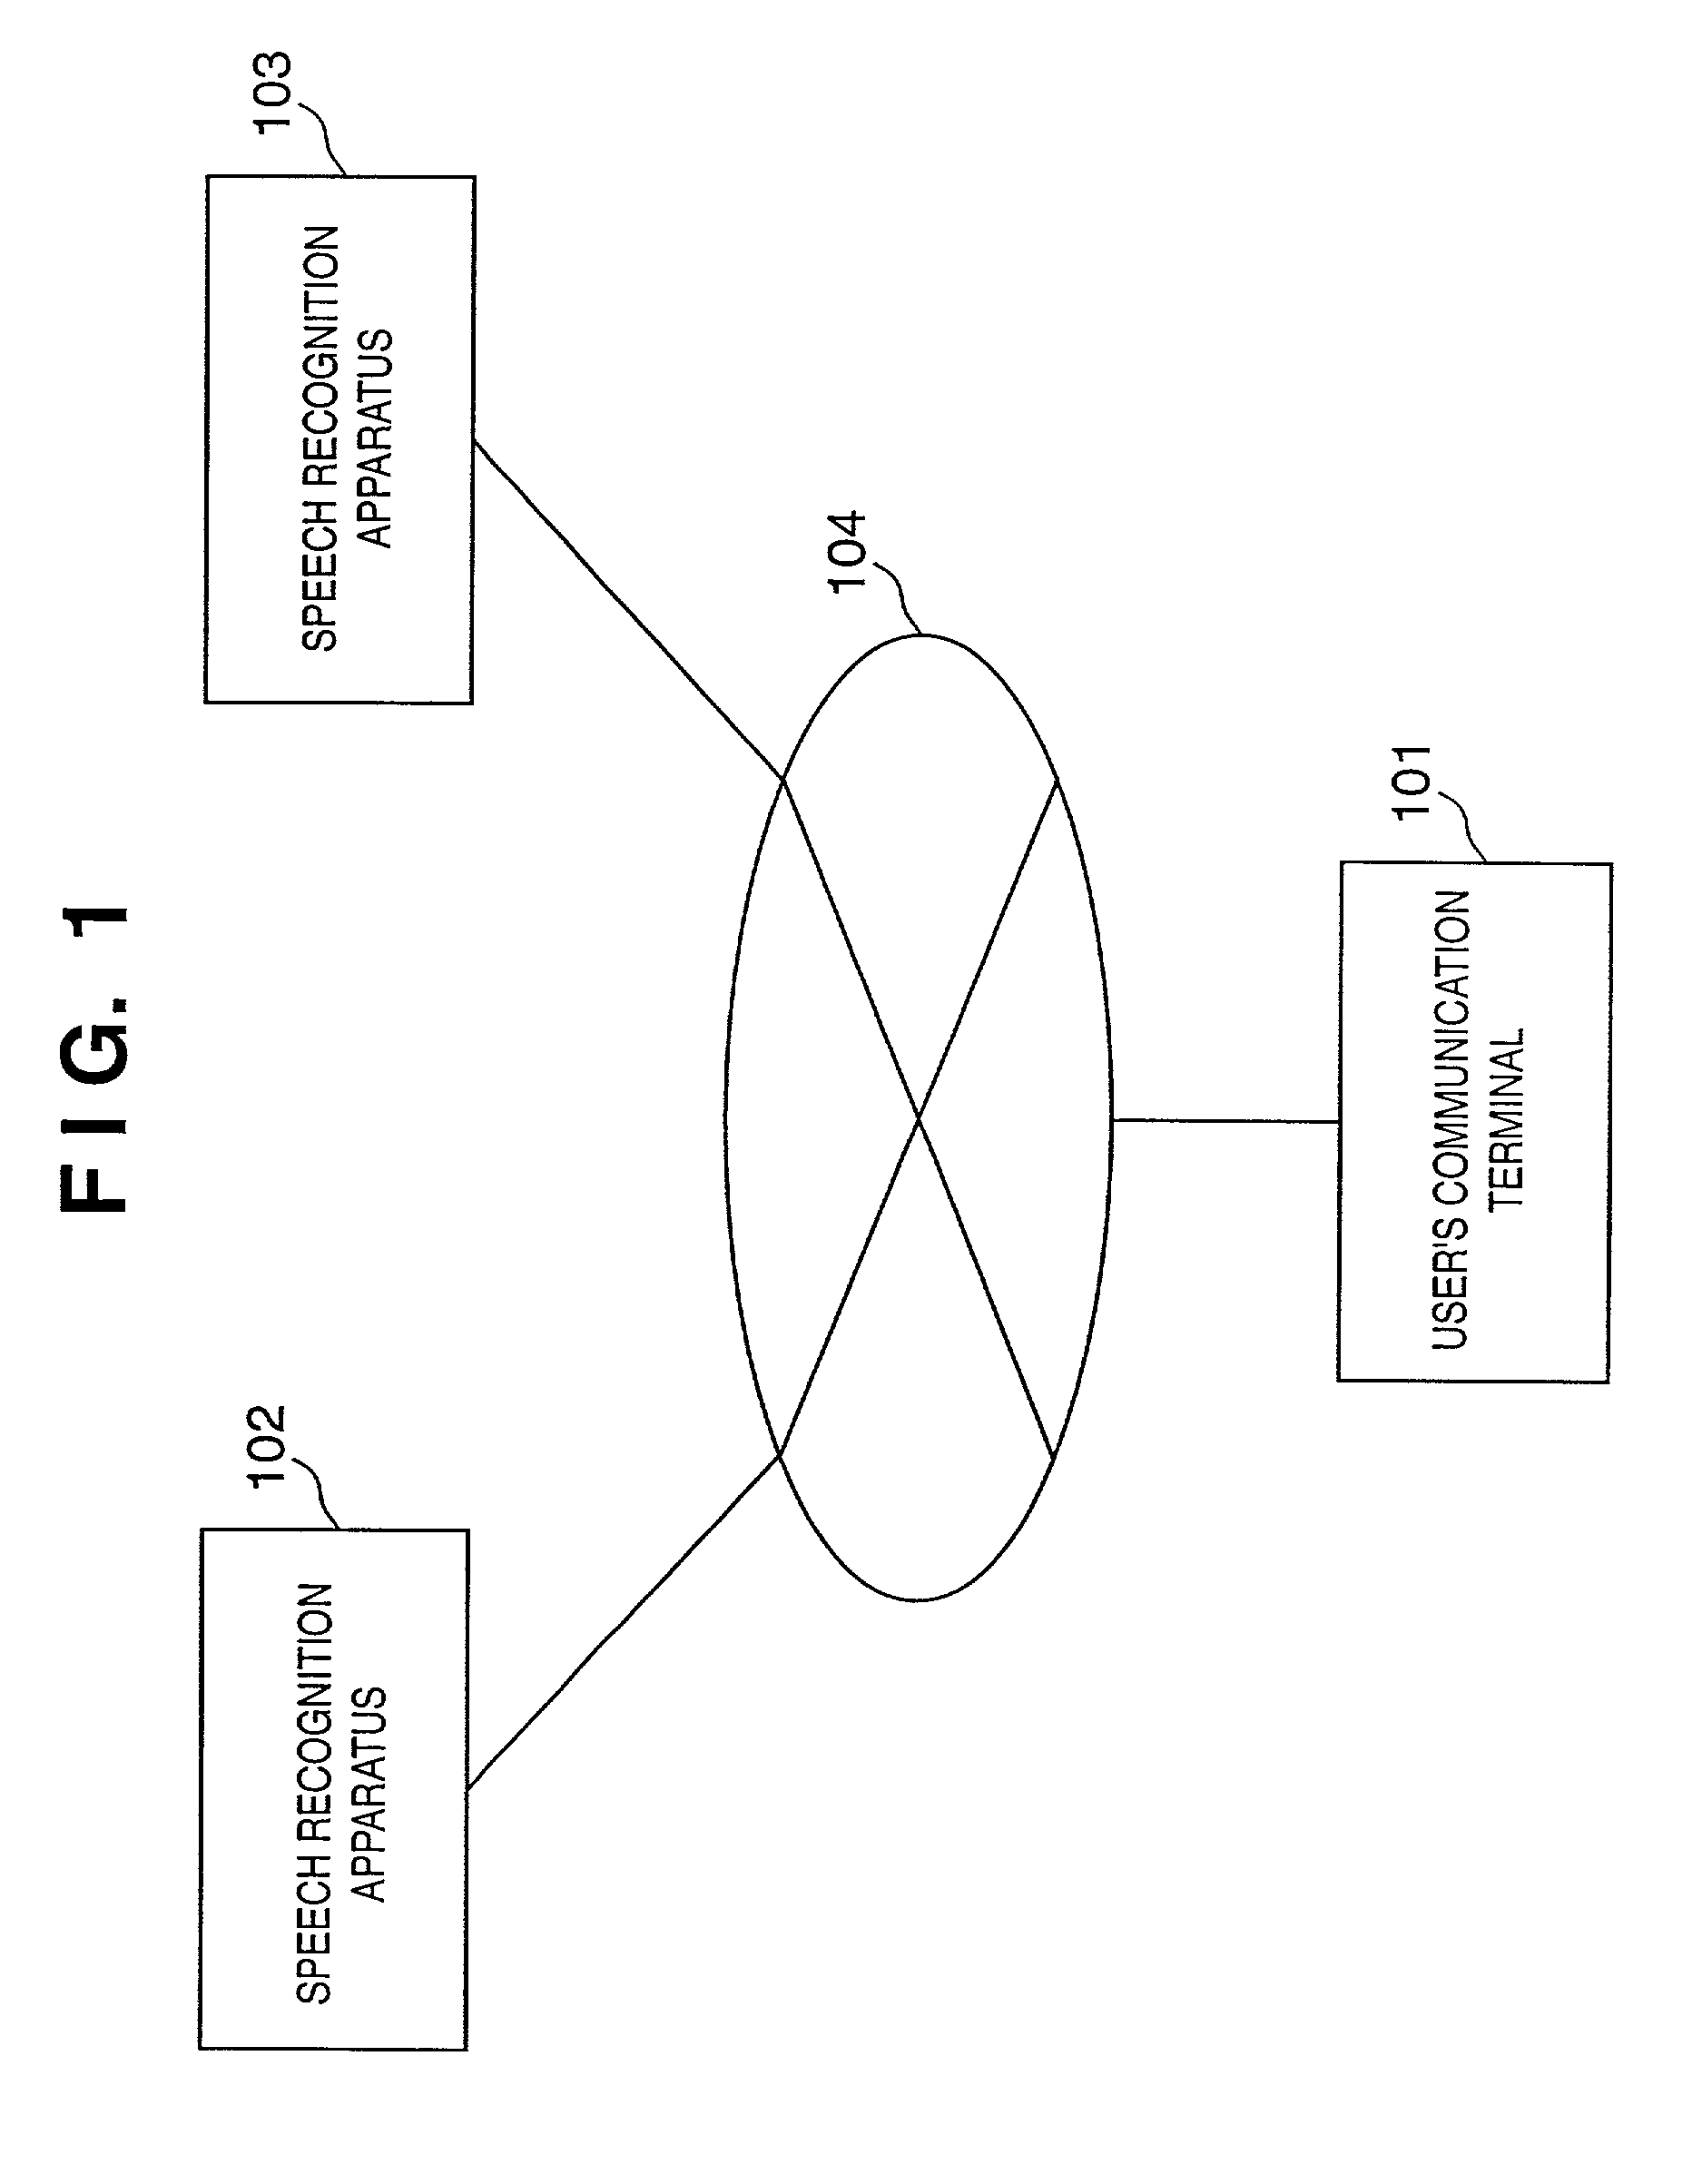 Speech recognition system, speech recognition apparatus, and speech recognition method